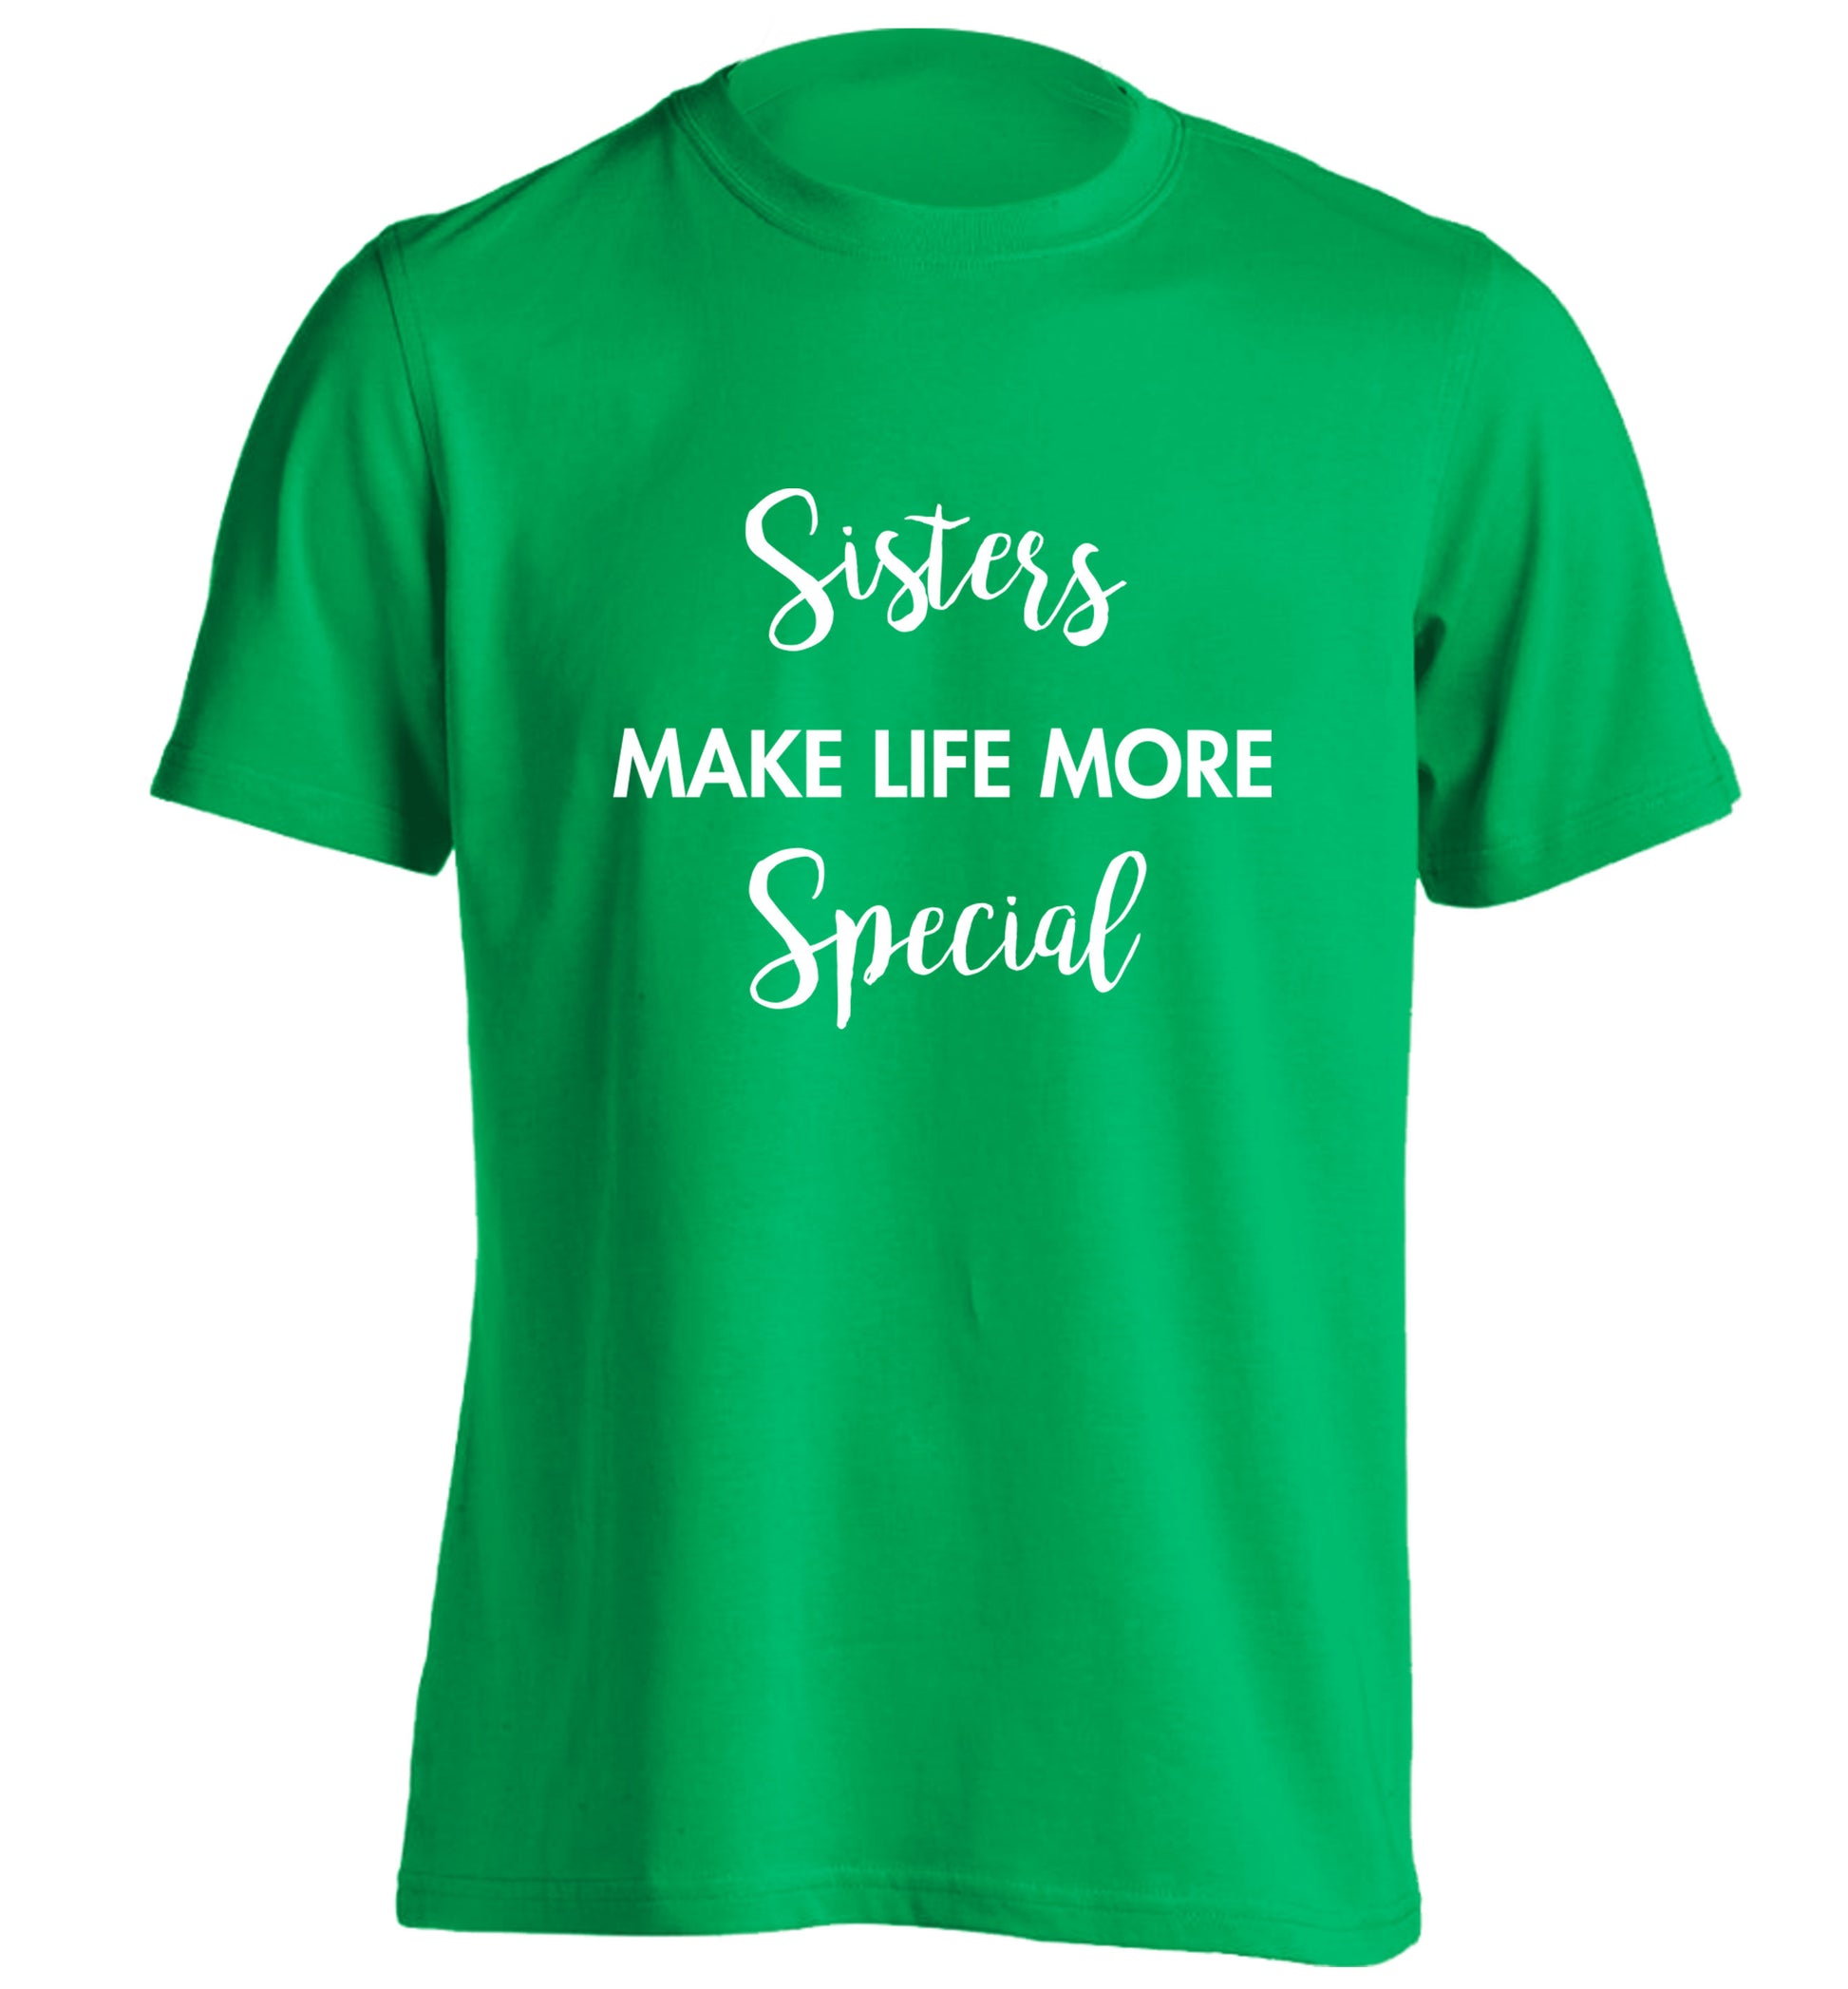 Sisters make life more special adults unisex green Tshirt 2XL